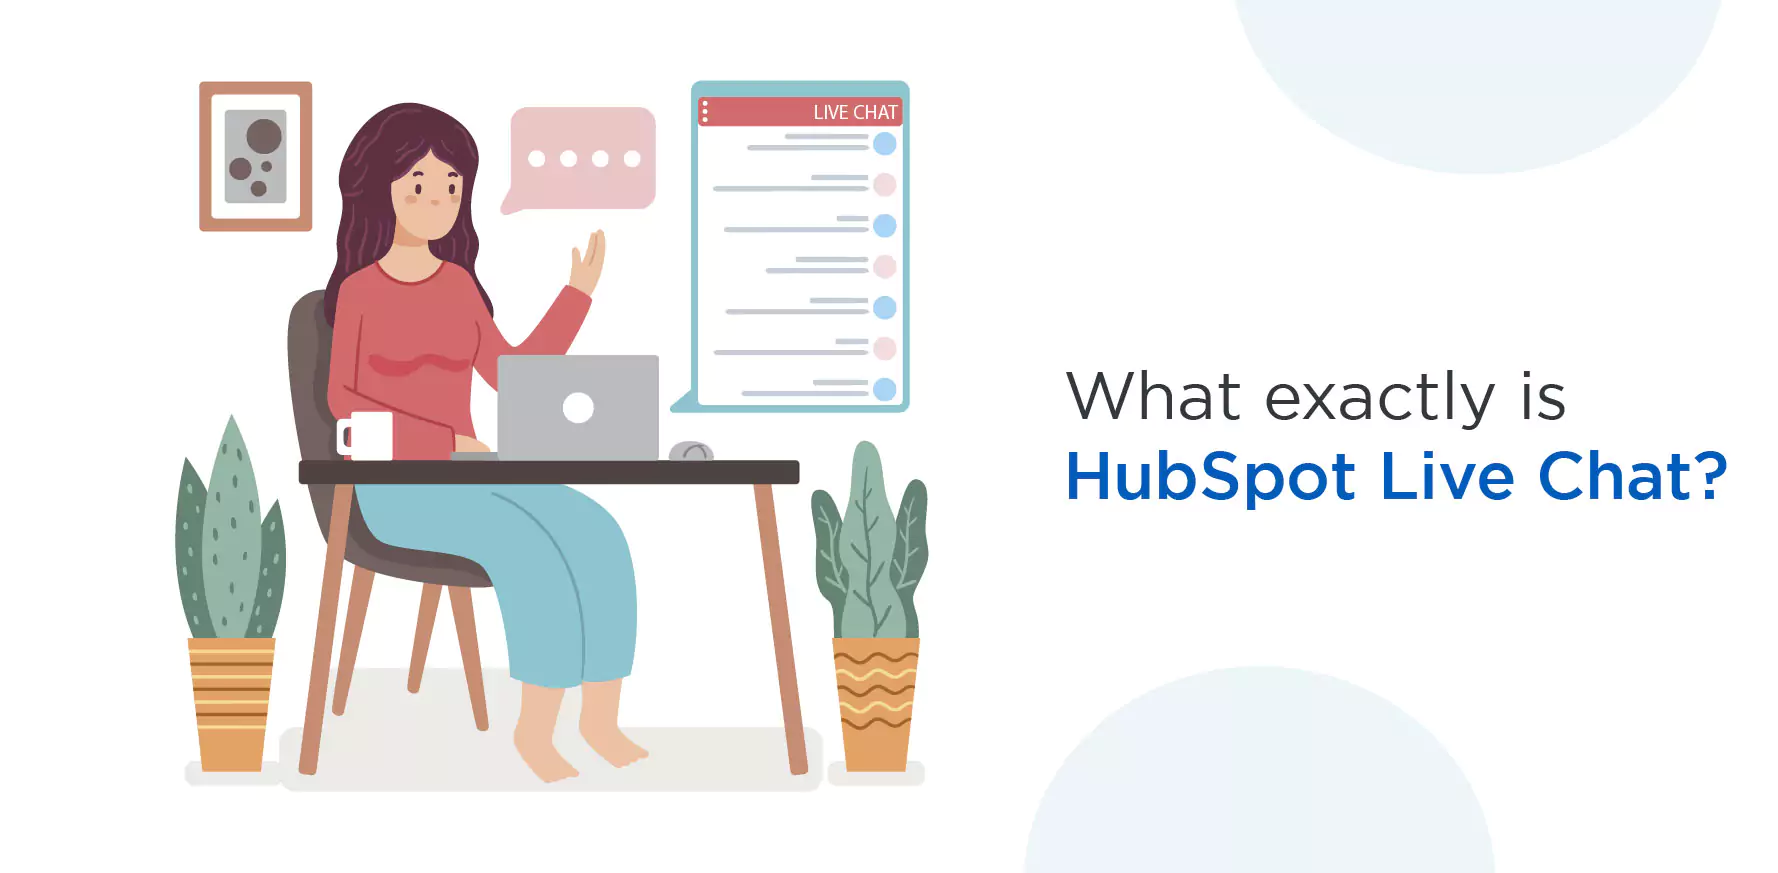 What exactly is HubSpot Live Chat?